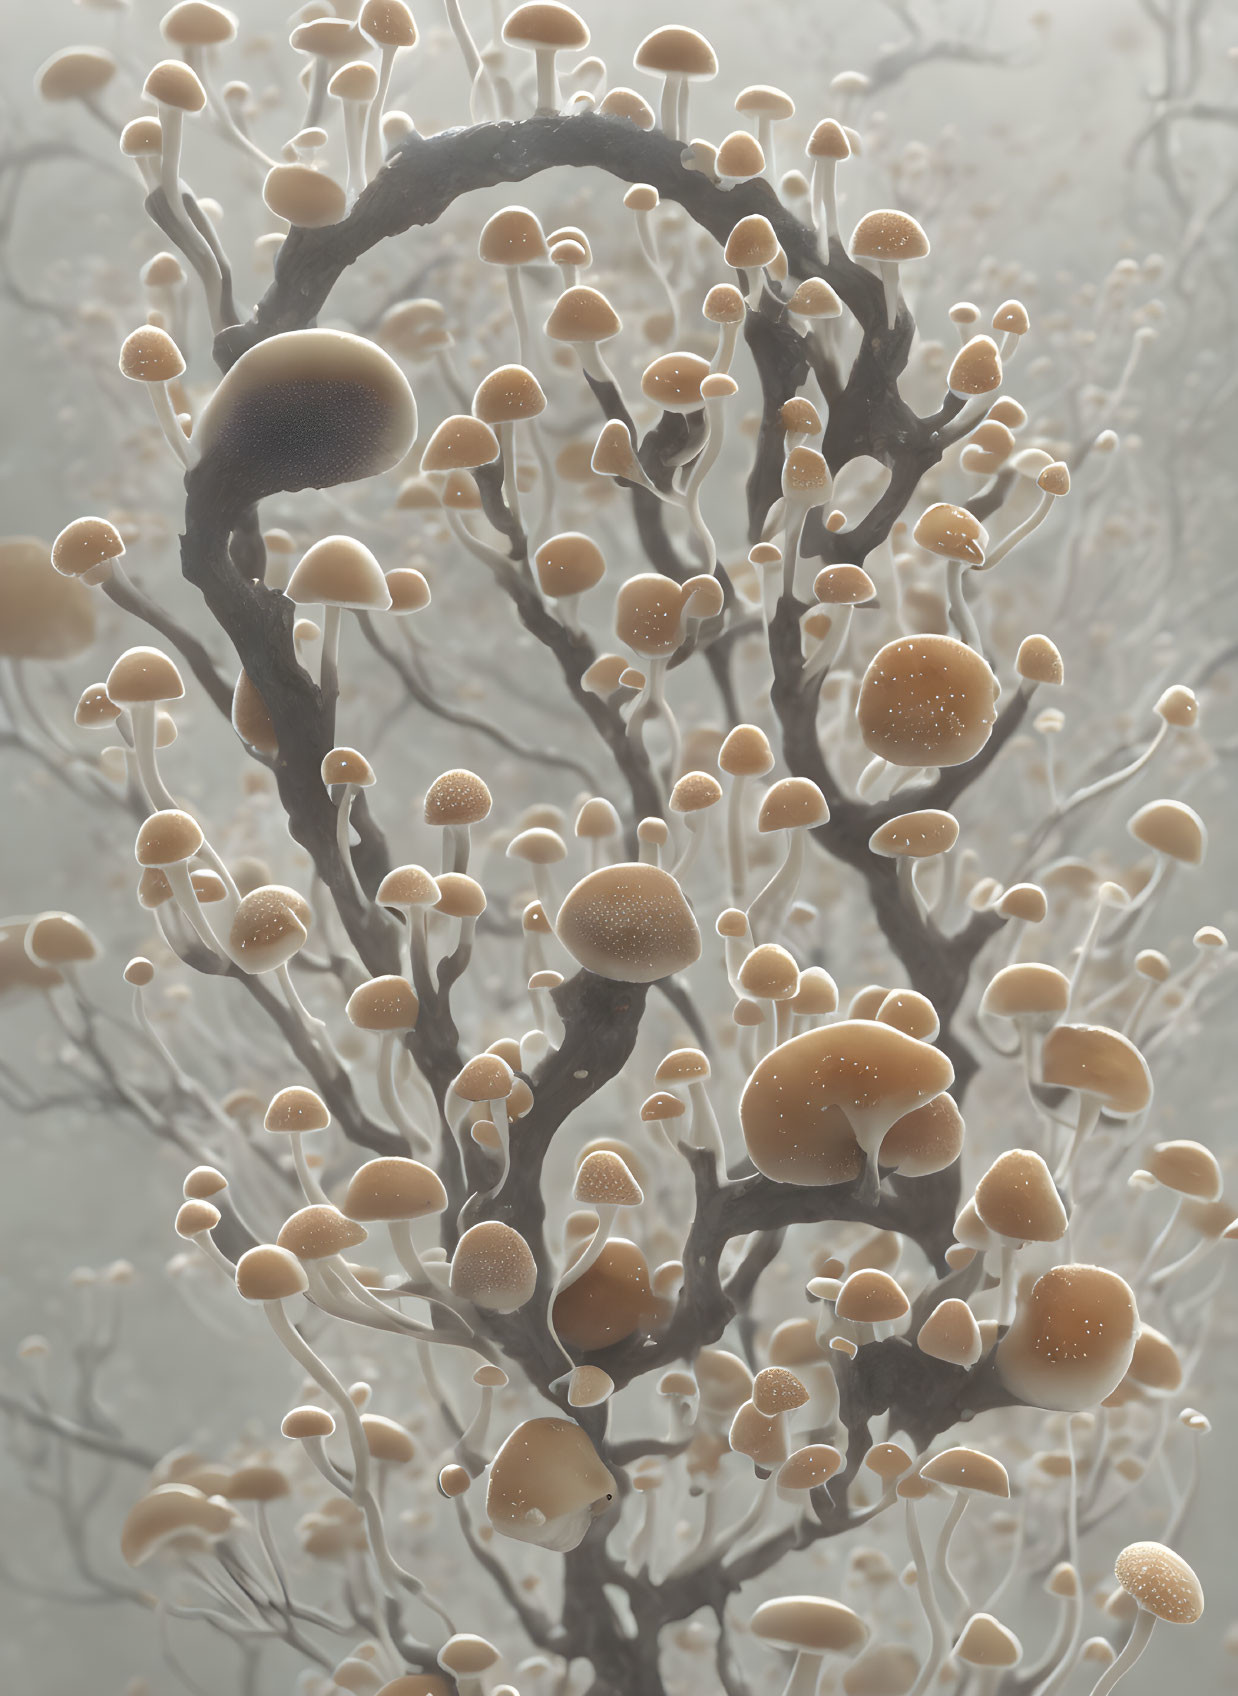 Delicate fungi on tree branches in misty environment